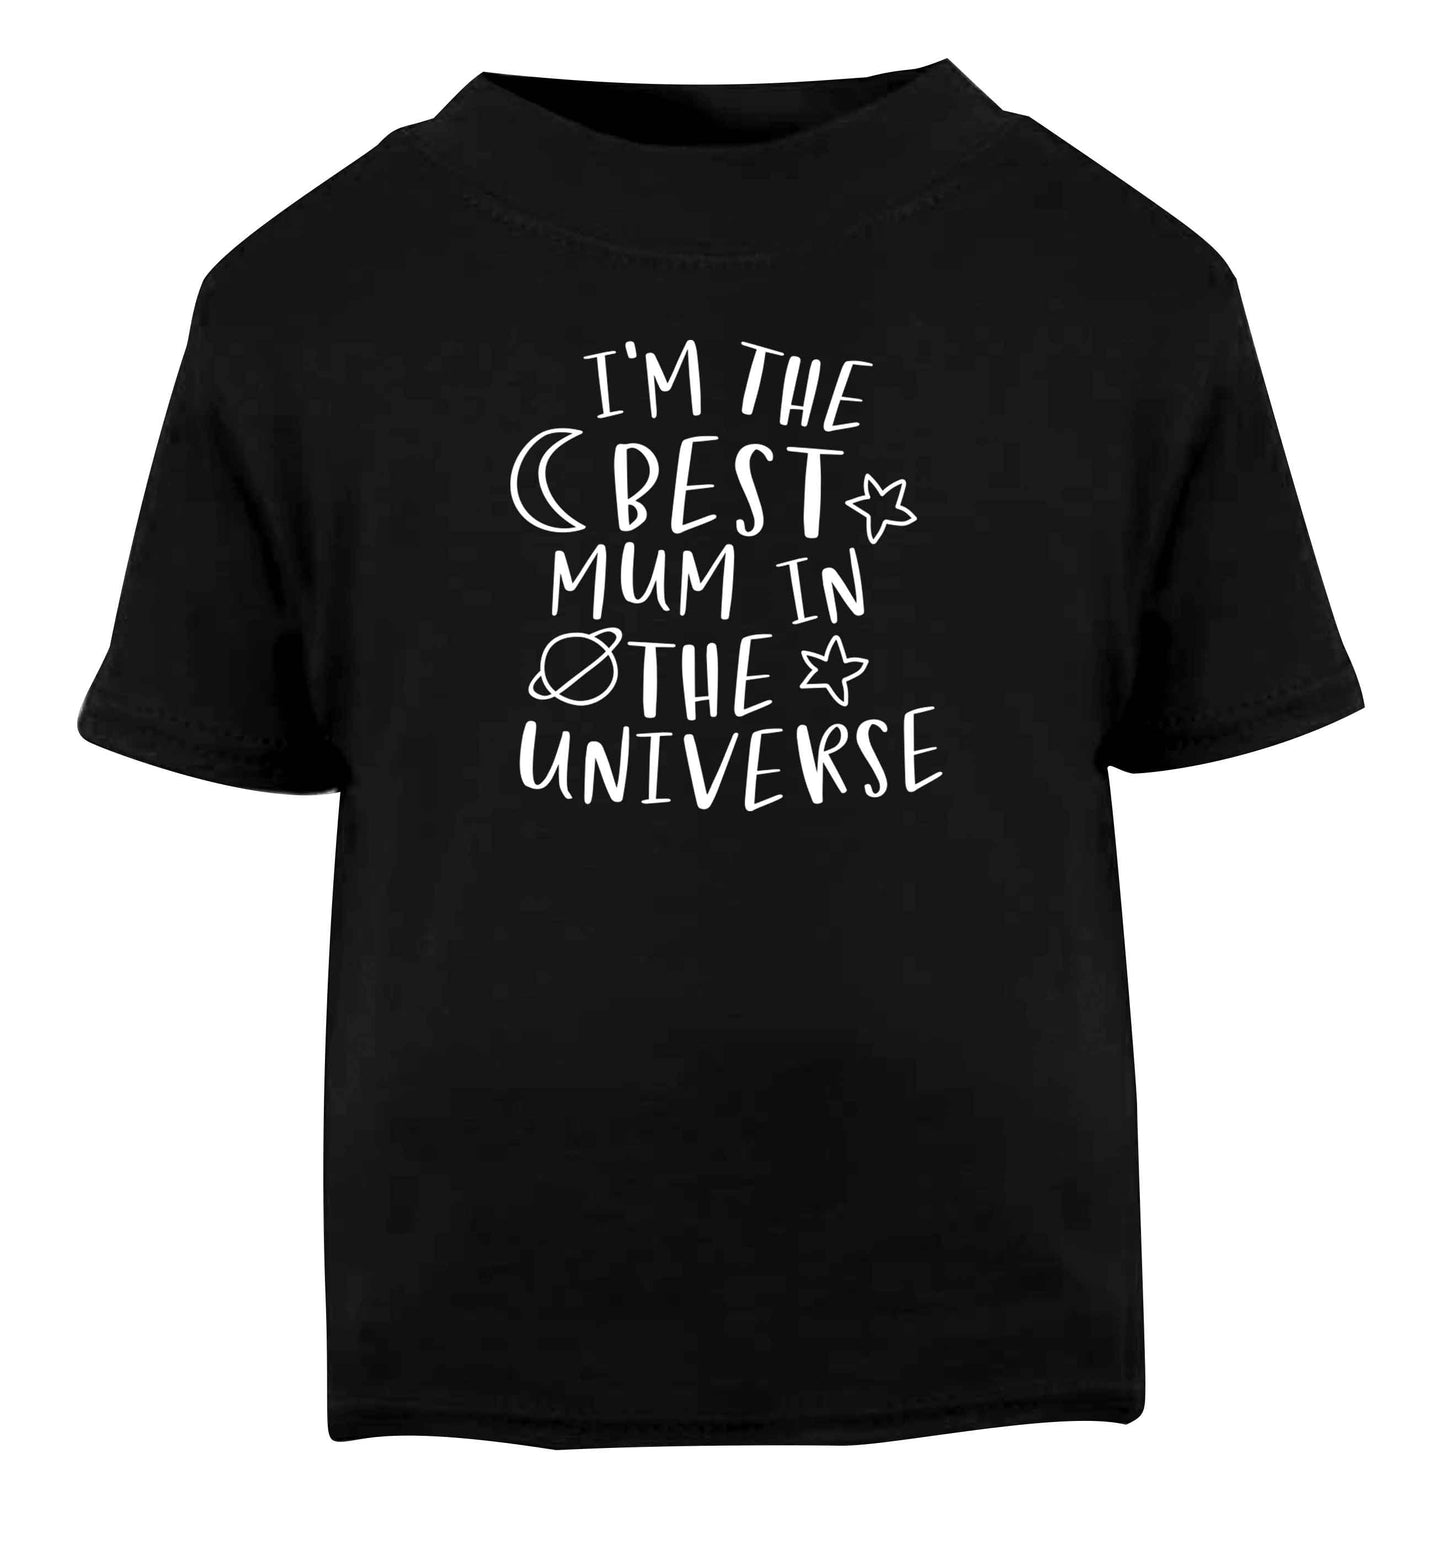 I'm the best mum in the universe Black baby toddler Tshirt 2 years